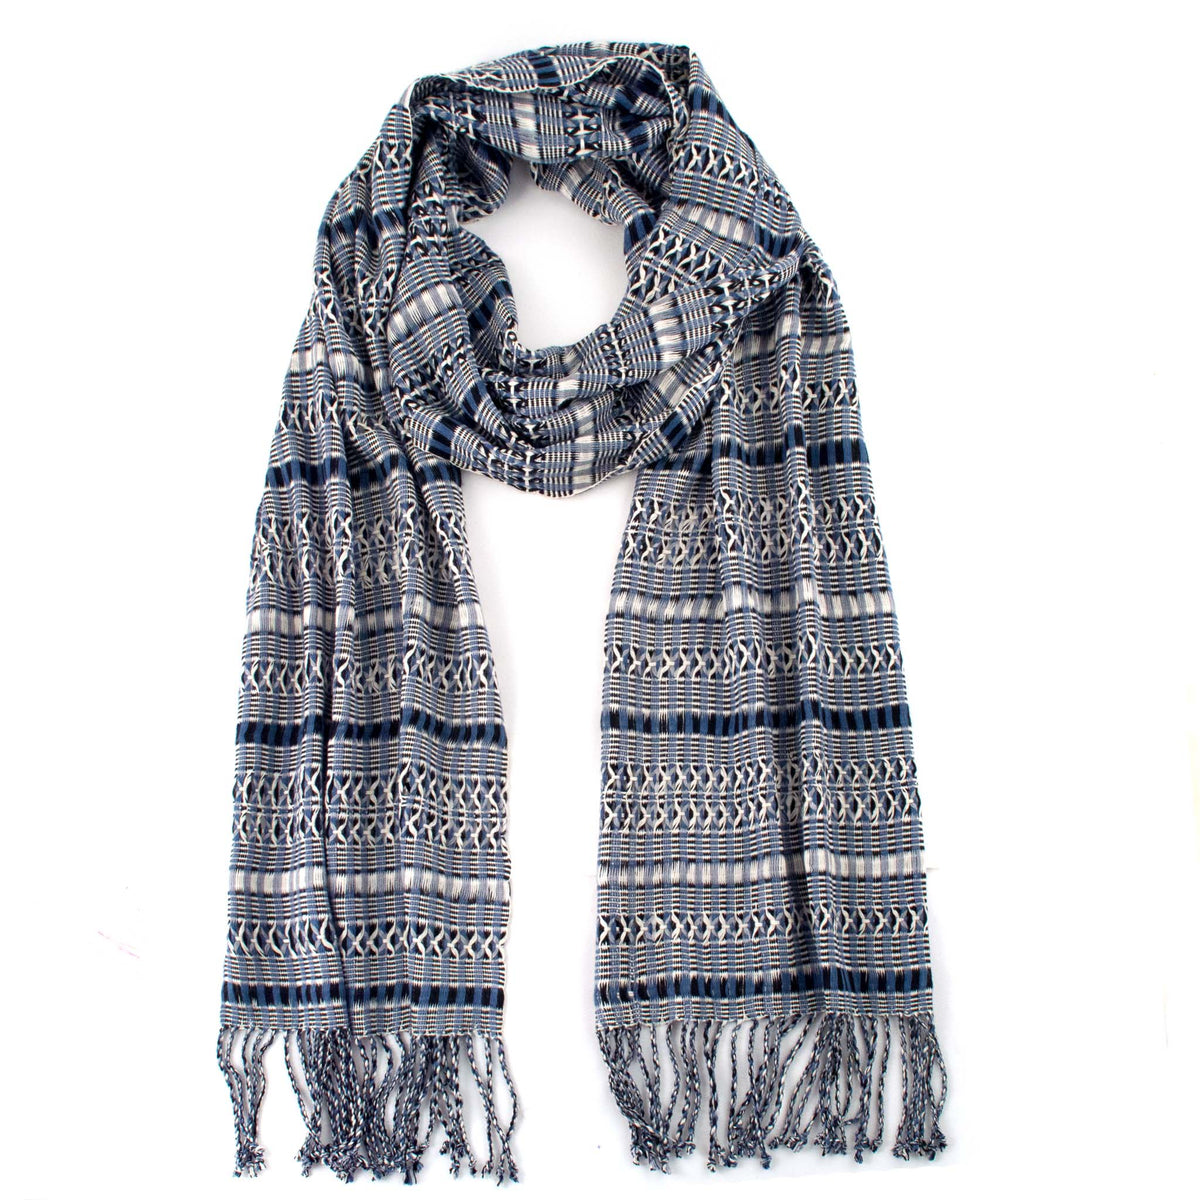 Linda Scarf in Black &amp; Blue &amp; Gray, woven from rayon threads in blue, black, and gray tones, with twisted fringe. The scarf is laid flat, wrapped with a circle on white background.